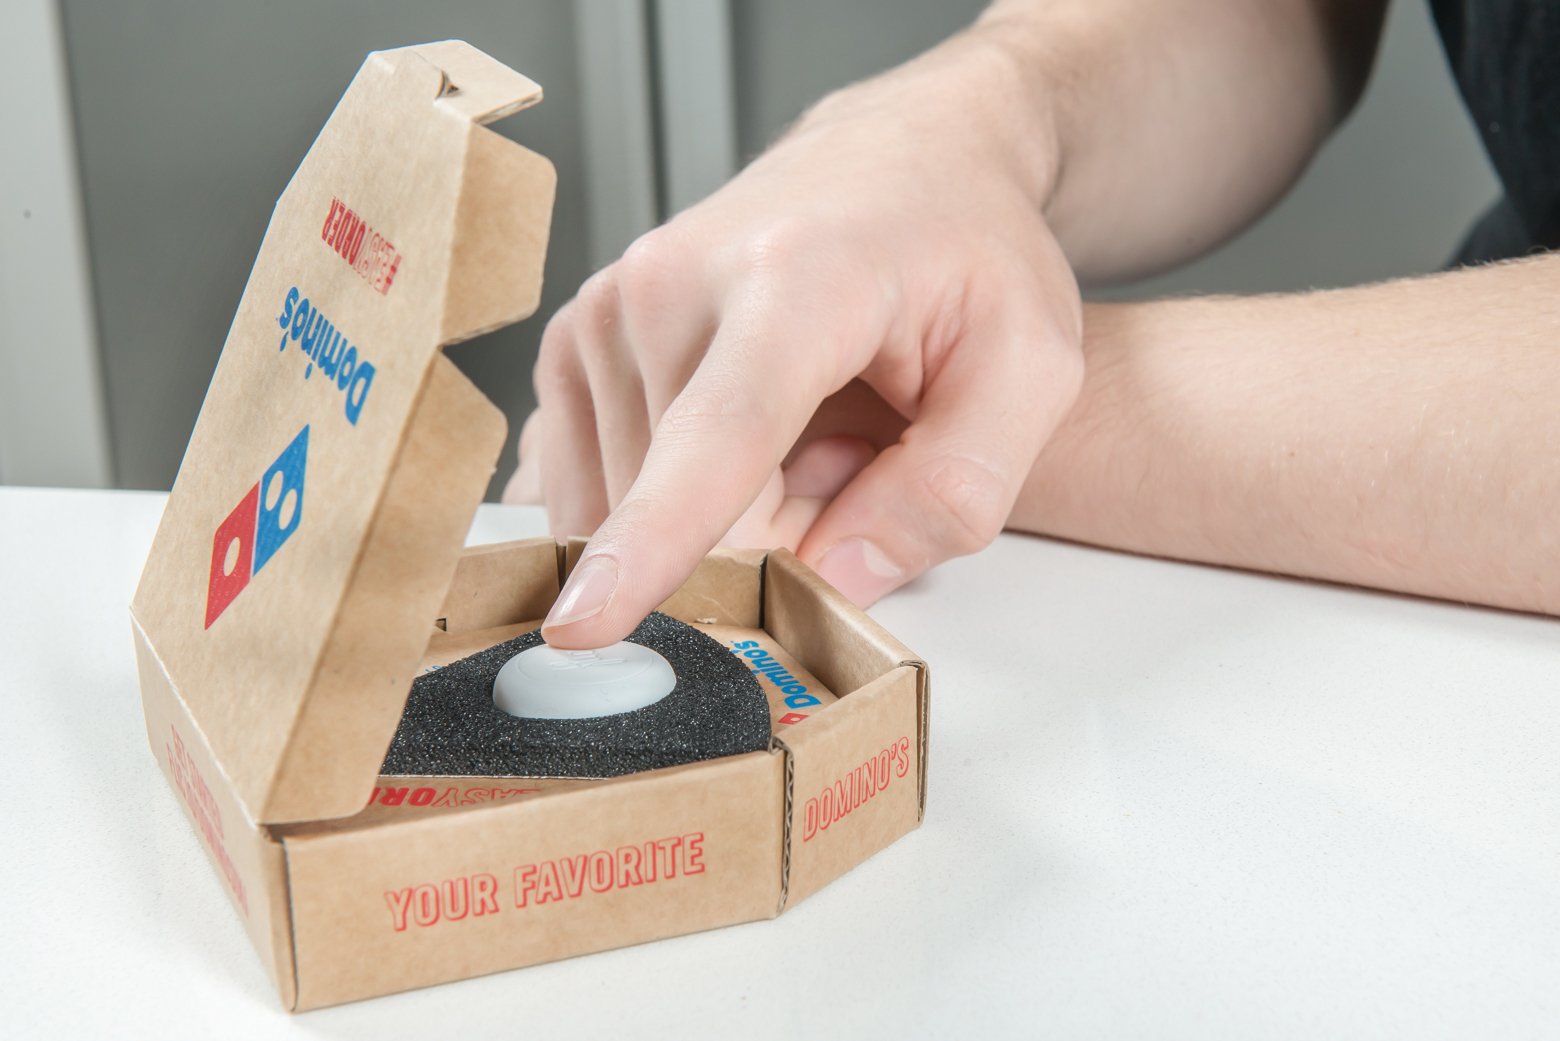 Domino's launches The Limited Edition Easy Order button allowing pizza lovers to order their favourite pizza straight to their door at the touch of a button.